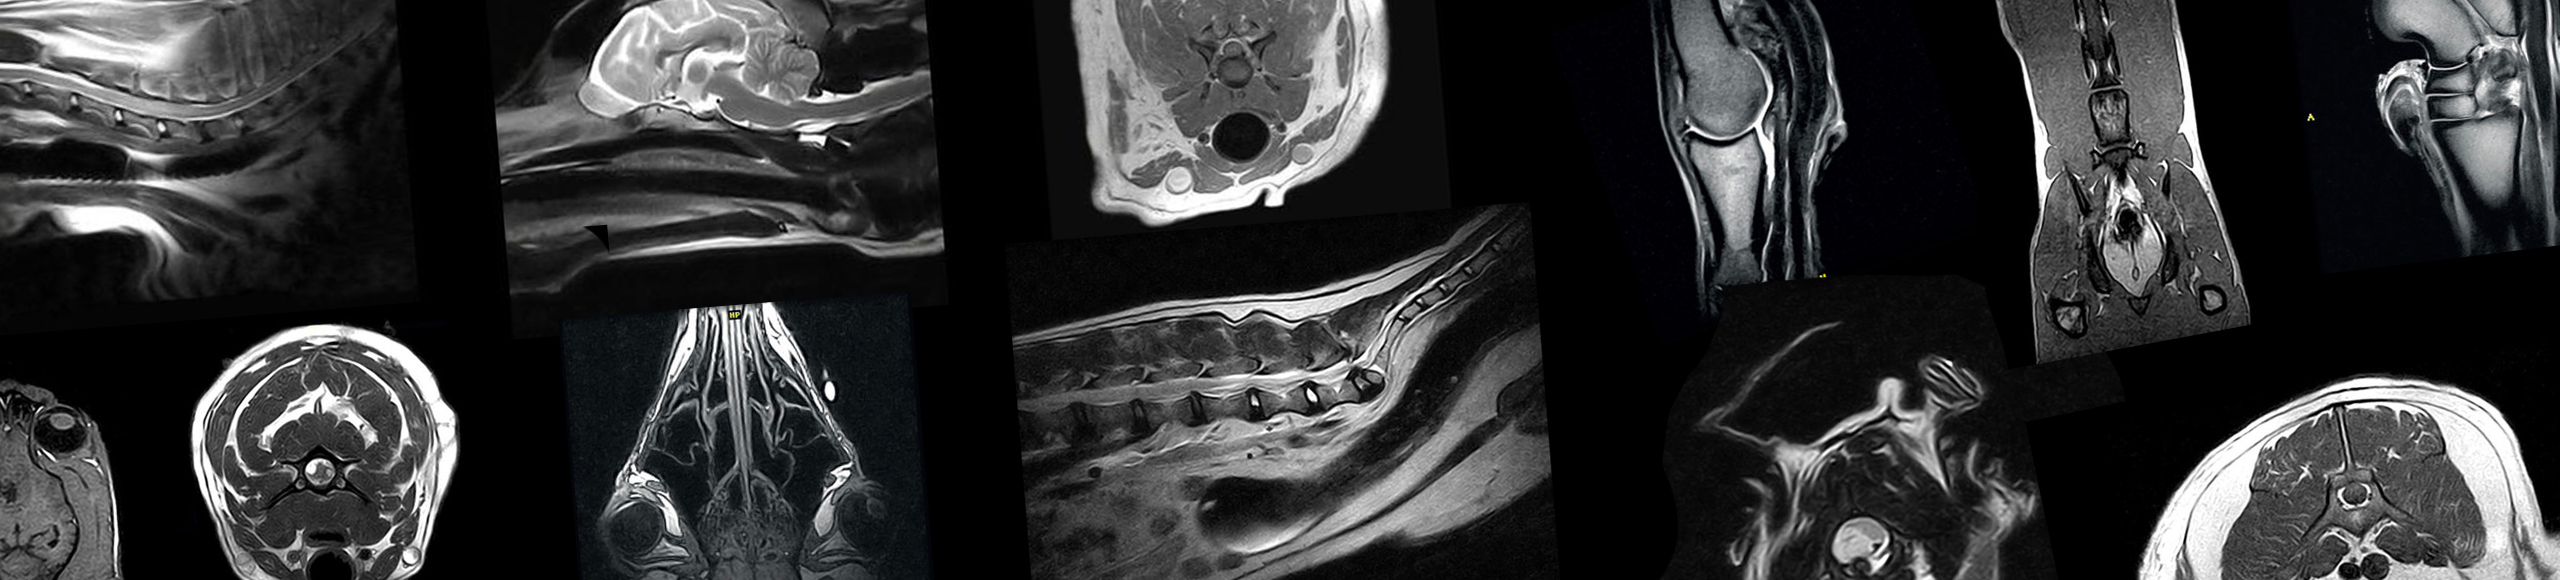 Veterinary MRI clinical images